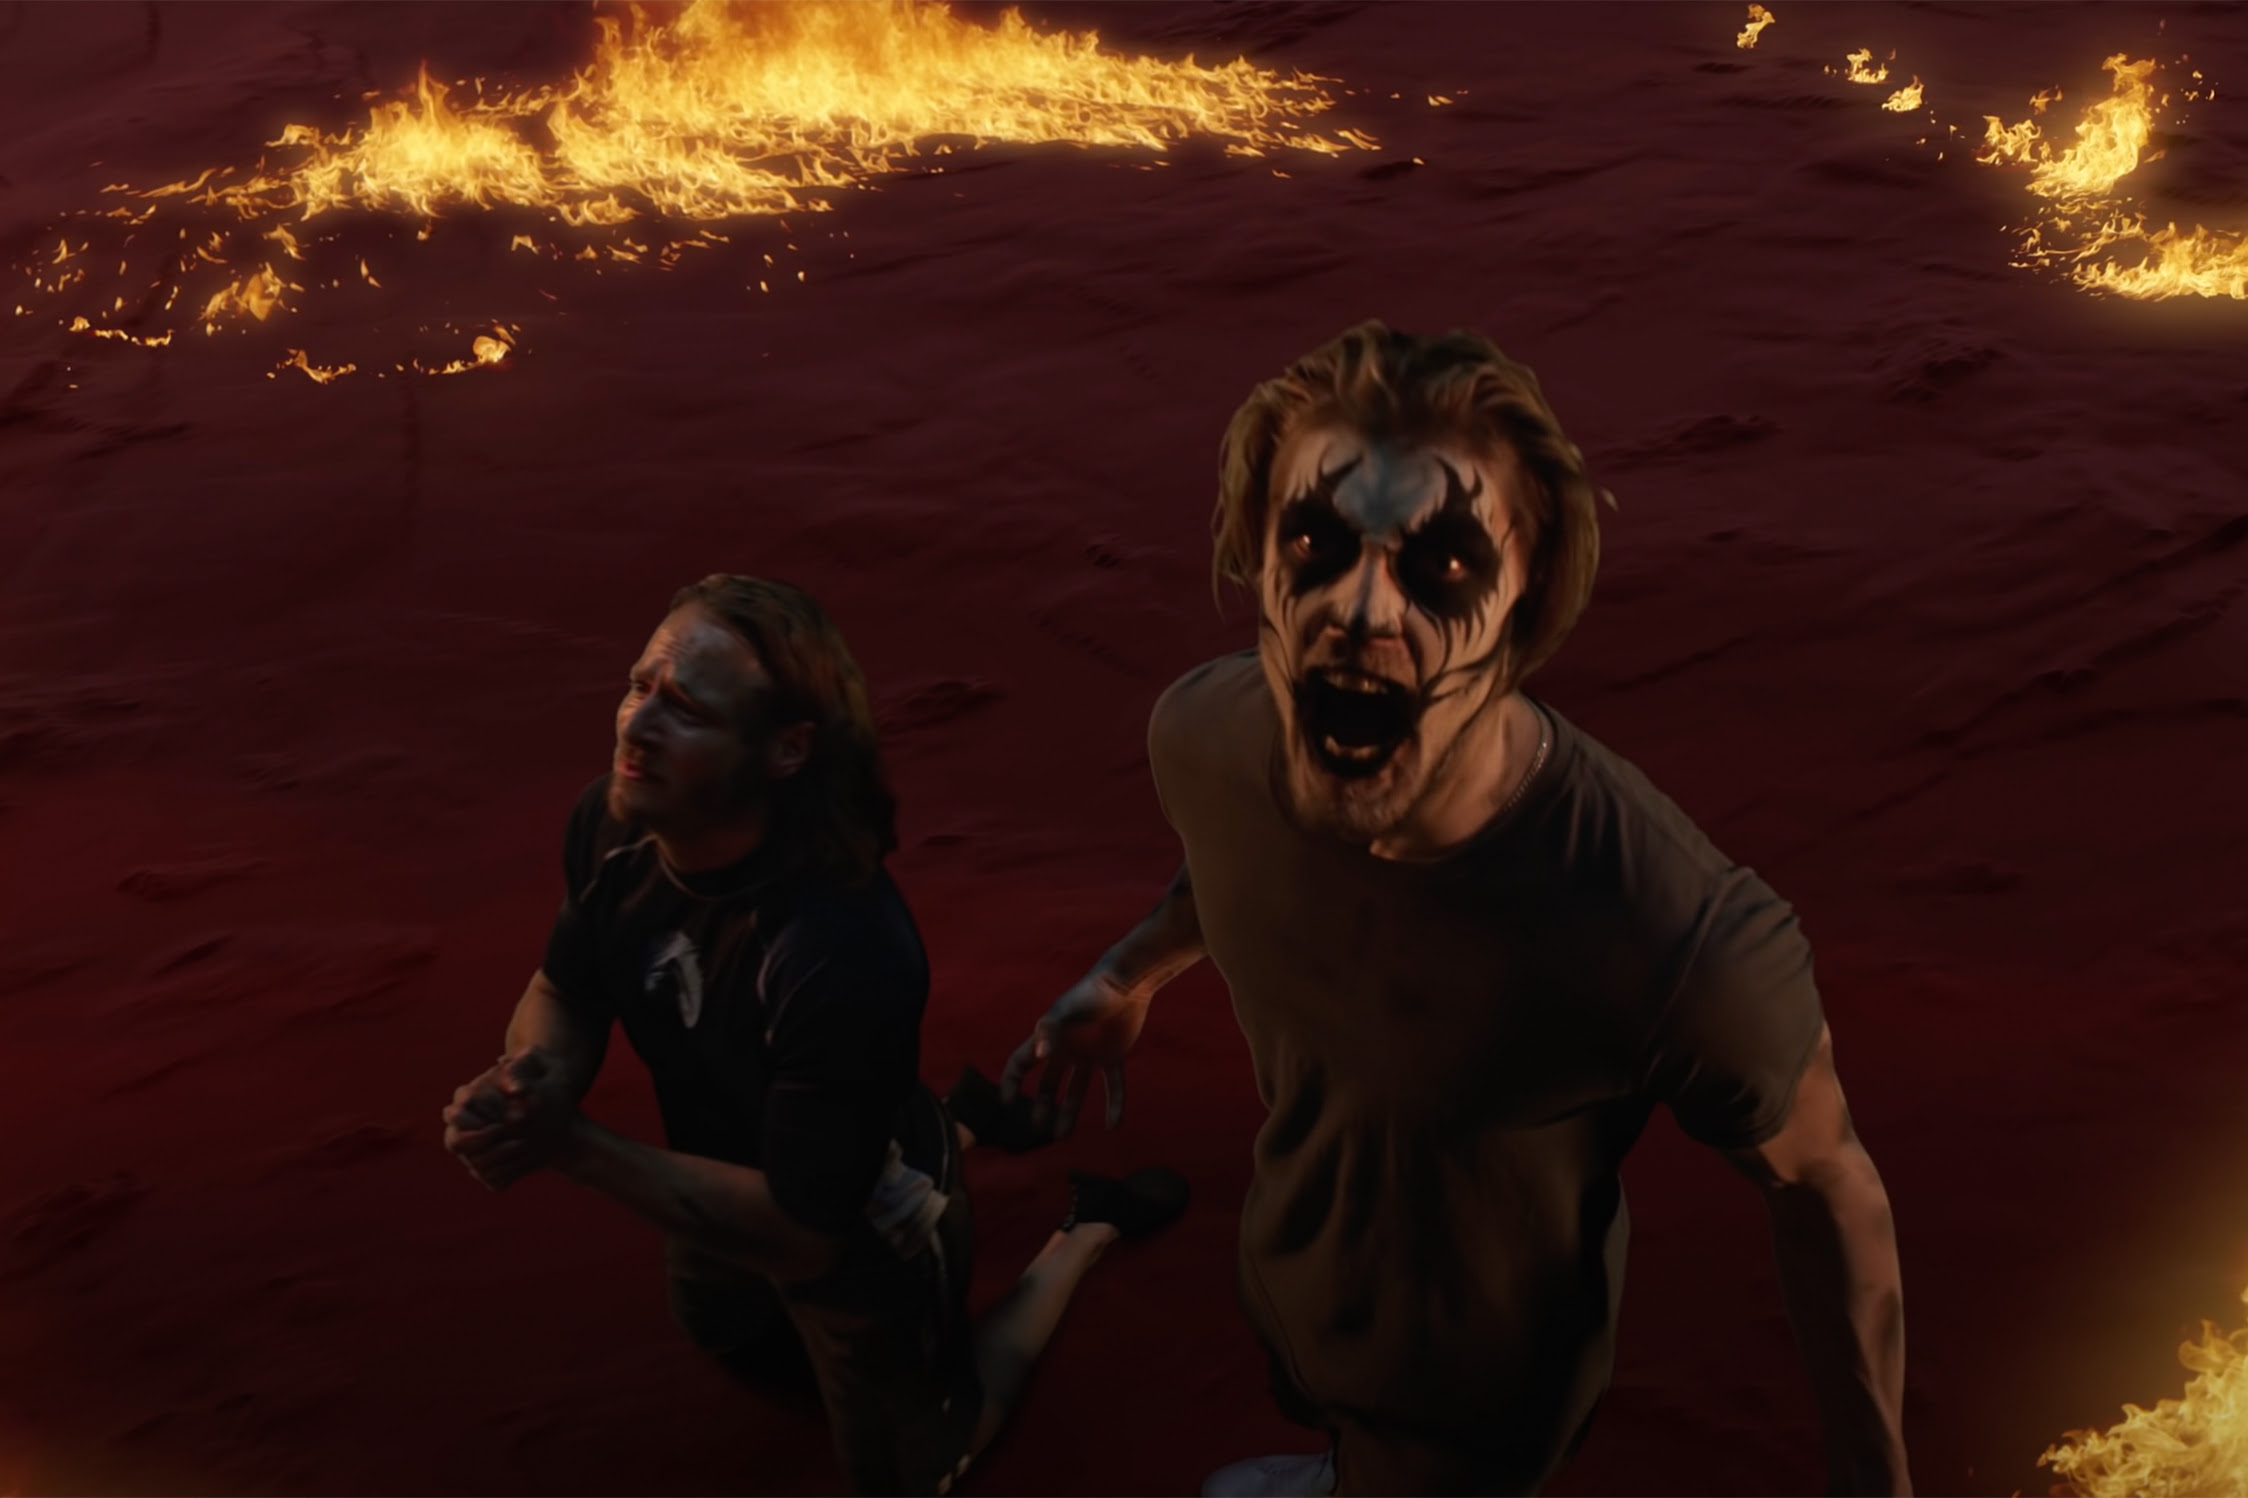 Here is a Depiction of What it is Like to go to Hell From the Movie Trailer “Journey to Hell” — Daniel Whyte III Says, Since Jesus Christ Preached on Hell More Than Any of the  Prophets or the Apostles and, Sadly, More Than Most Pastors Have Over the Past 50 to 60 Years, and Since Jesus Christ Preached on Hell More Than Heaven, the True God-called Pastors Who are Left Ought to Include Preaching on Hell in Every Sermon Going Forward Until They Die or Until Jesus Comes!